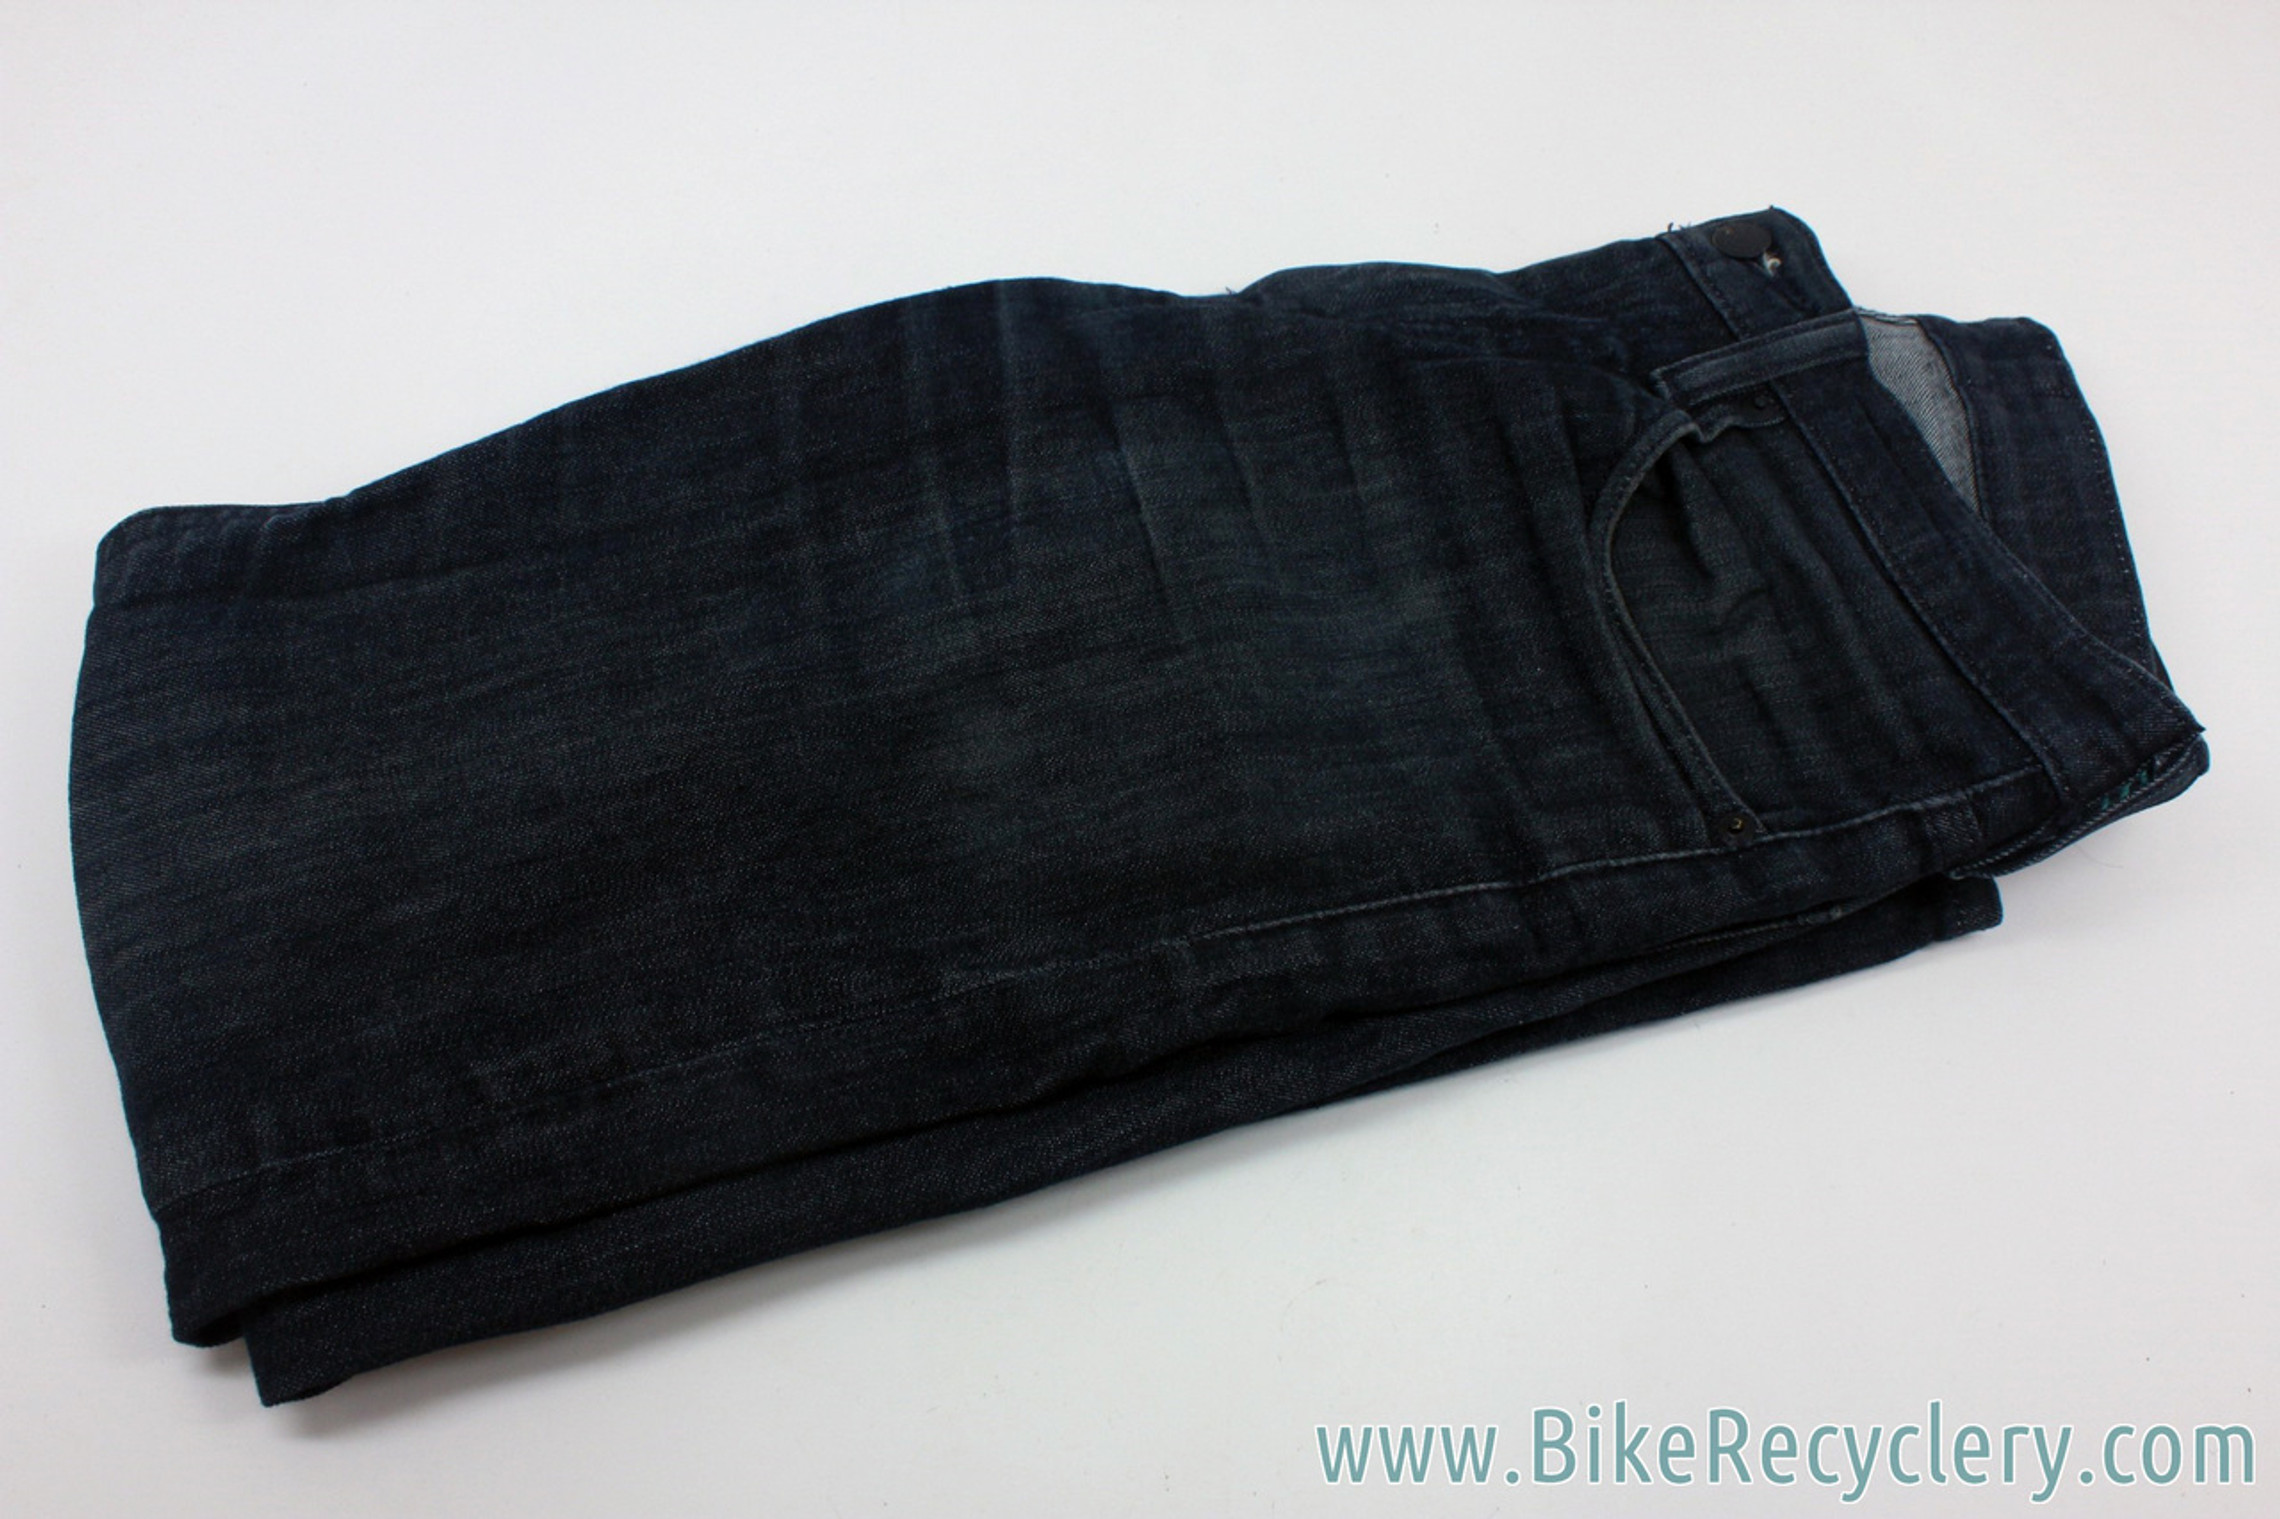 Levi's 504 Commuter Cycling Jeans: W: 29